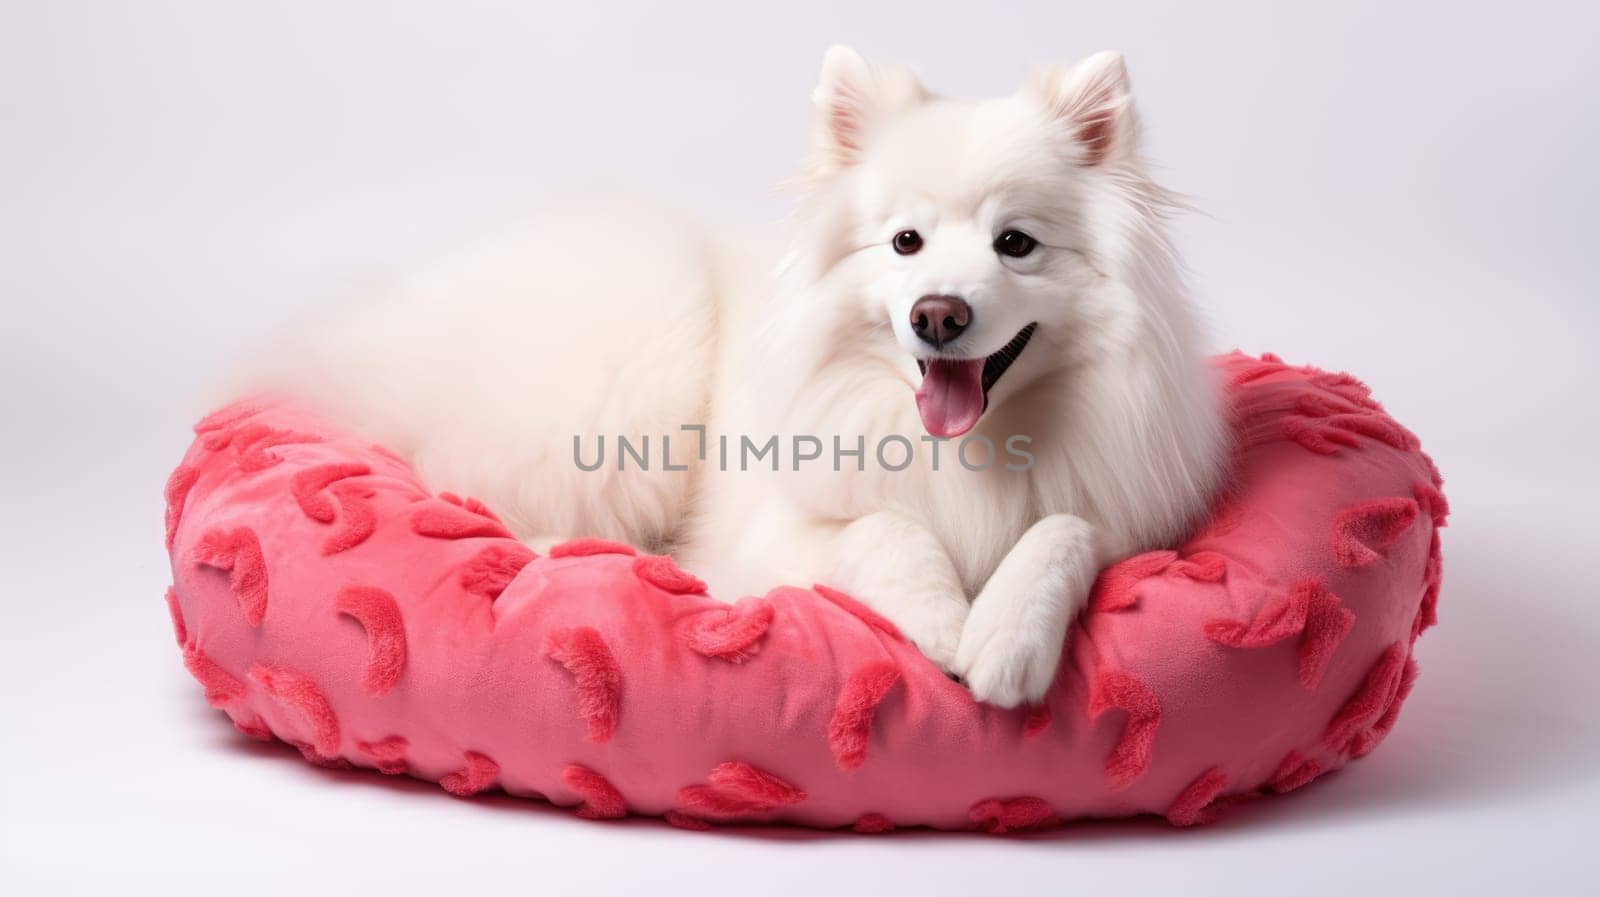 Cute puppy sleeping peacefully on soft yellow bed. Small dog is resting at home by JuliaDorian